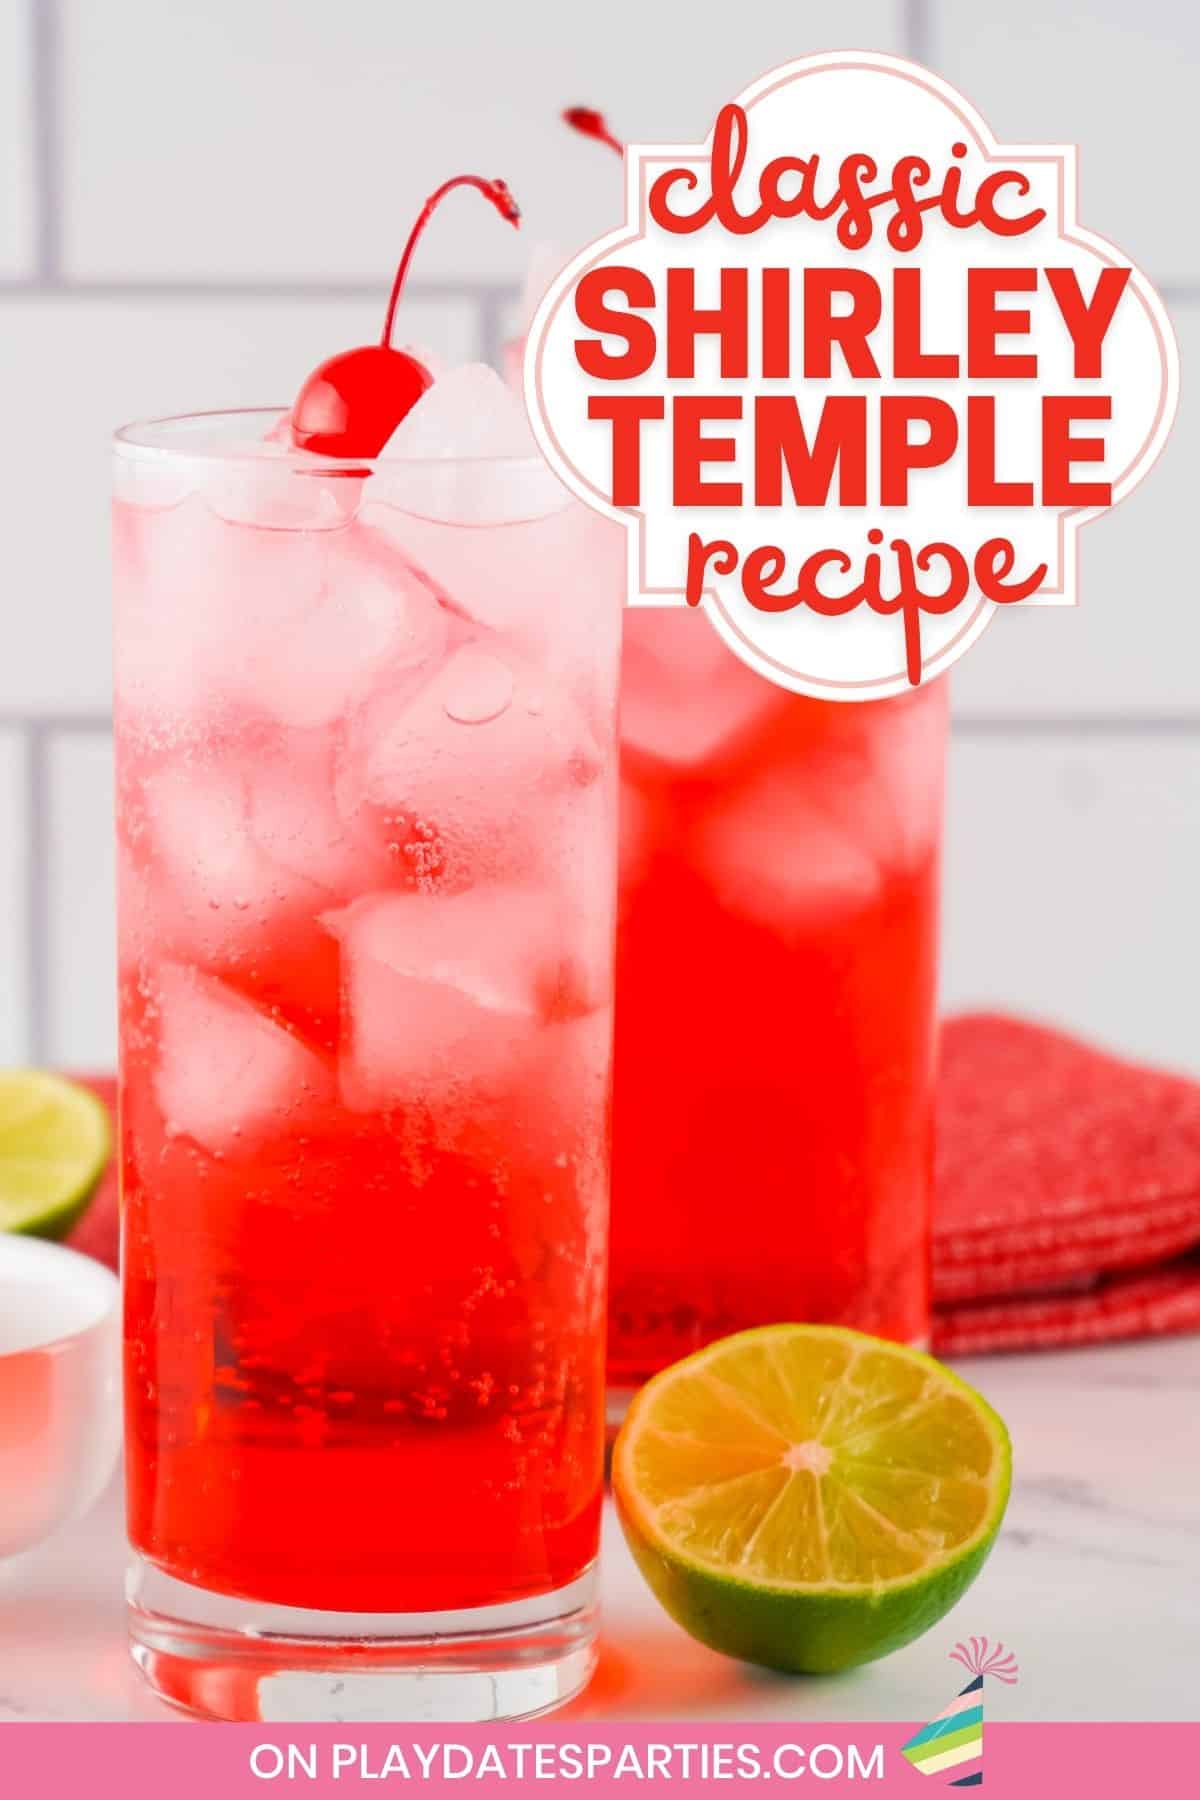 An icy red drink on a marble counter with text overlay classic Shirley Temple recipe.